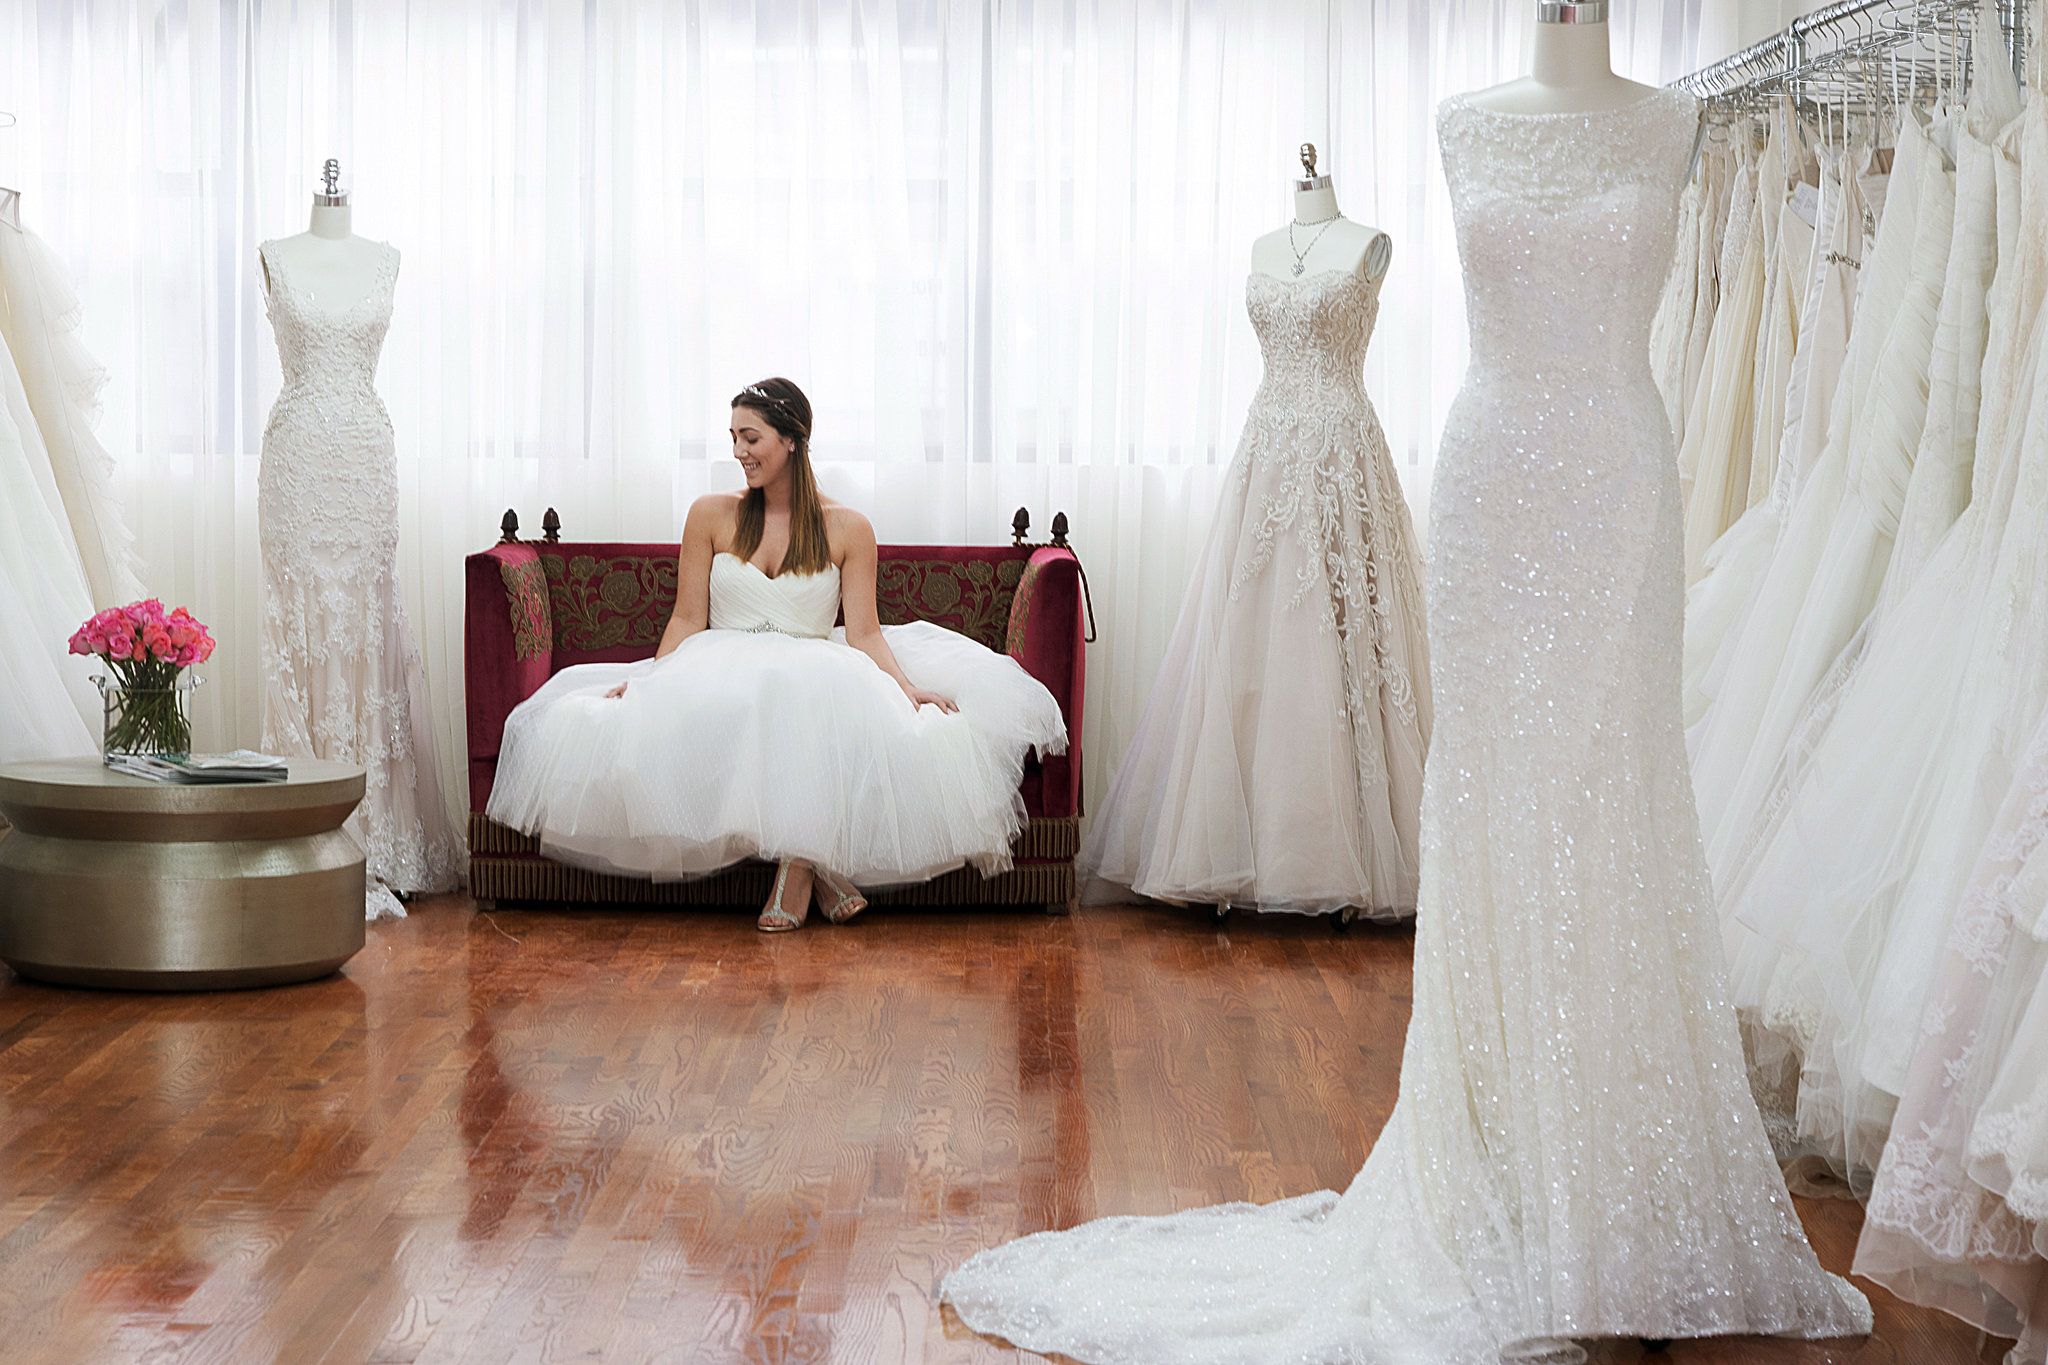 Designer Gowns Without the Wait or Drama